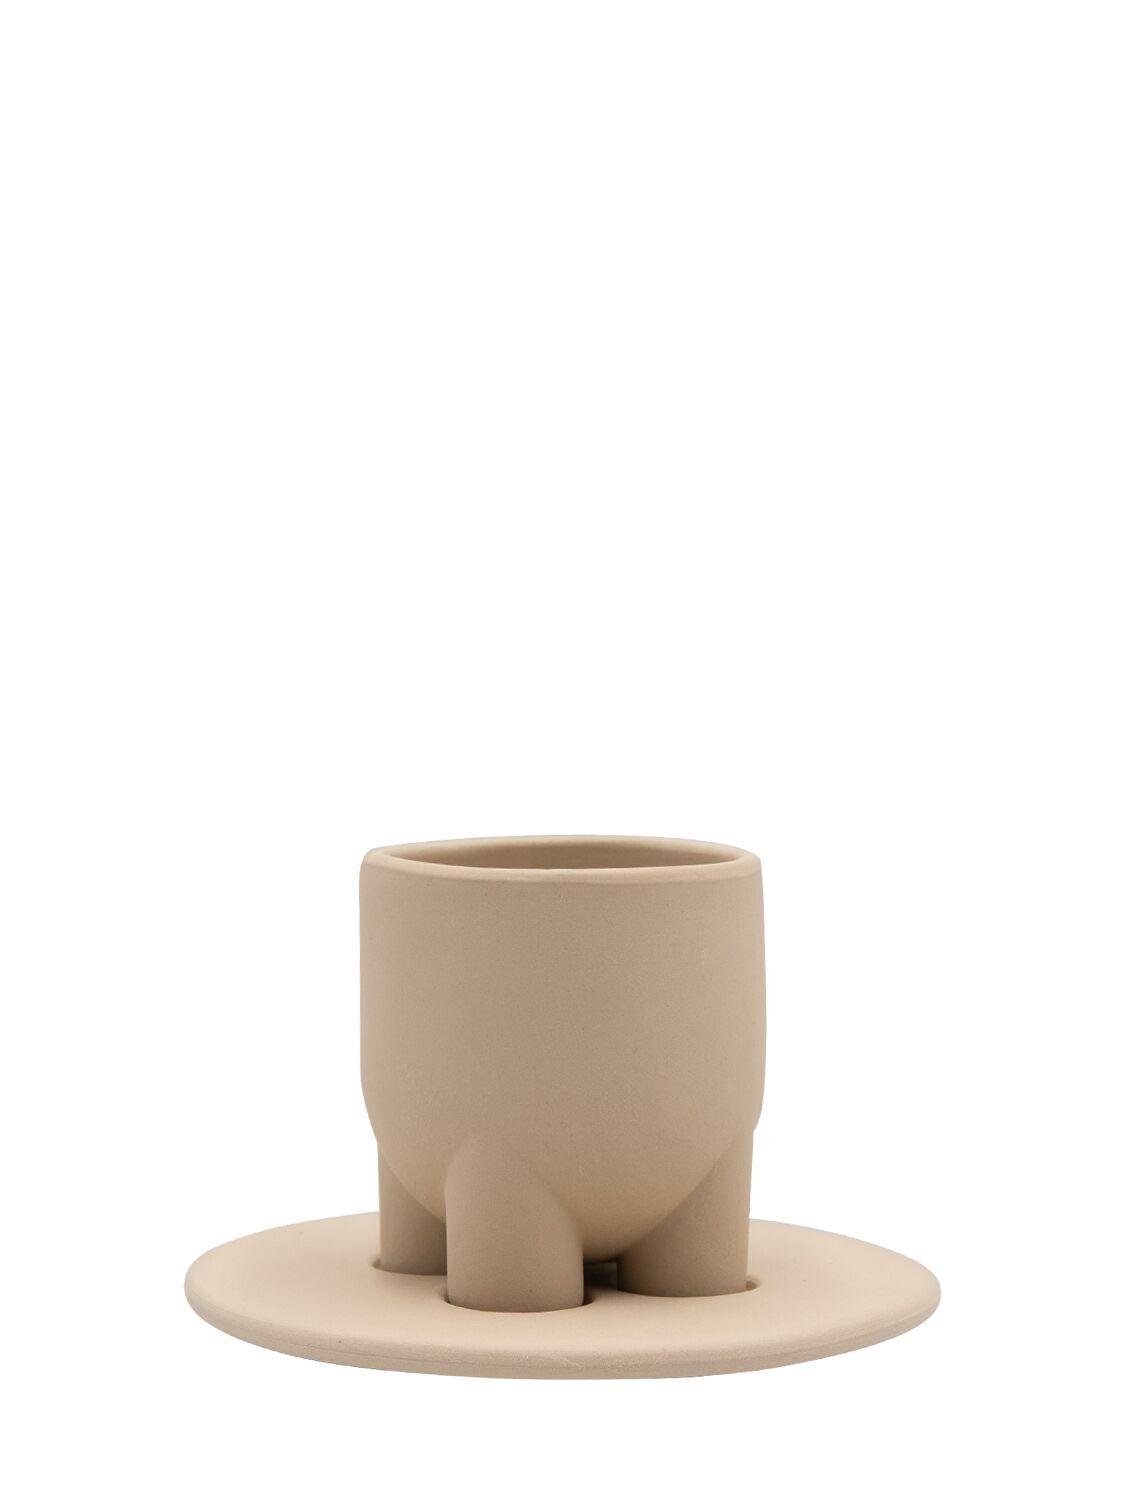 Cappuccino Cup & Saucer by BURGIO.